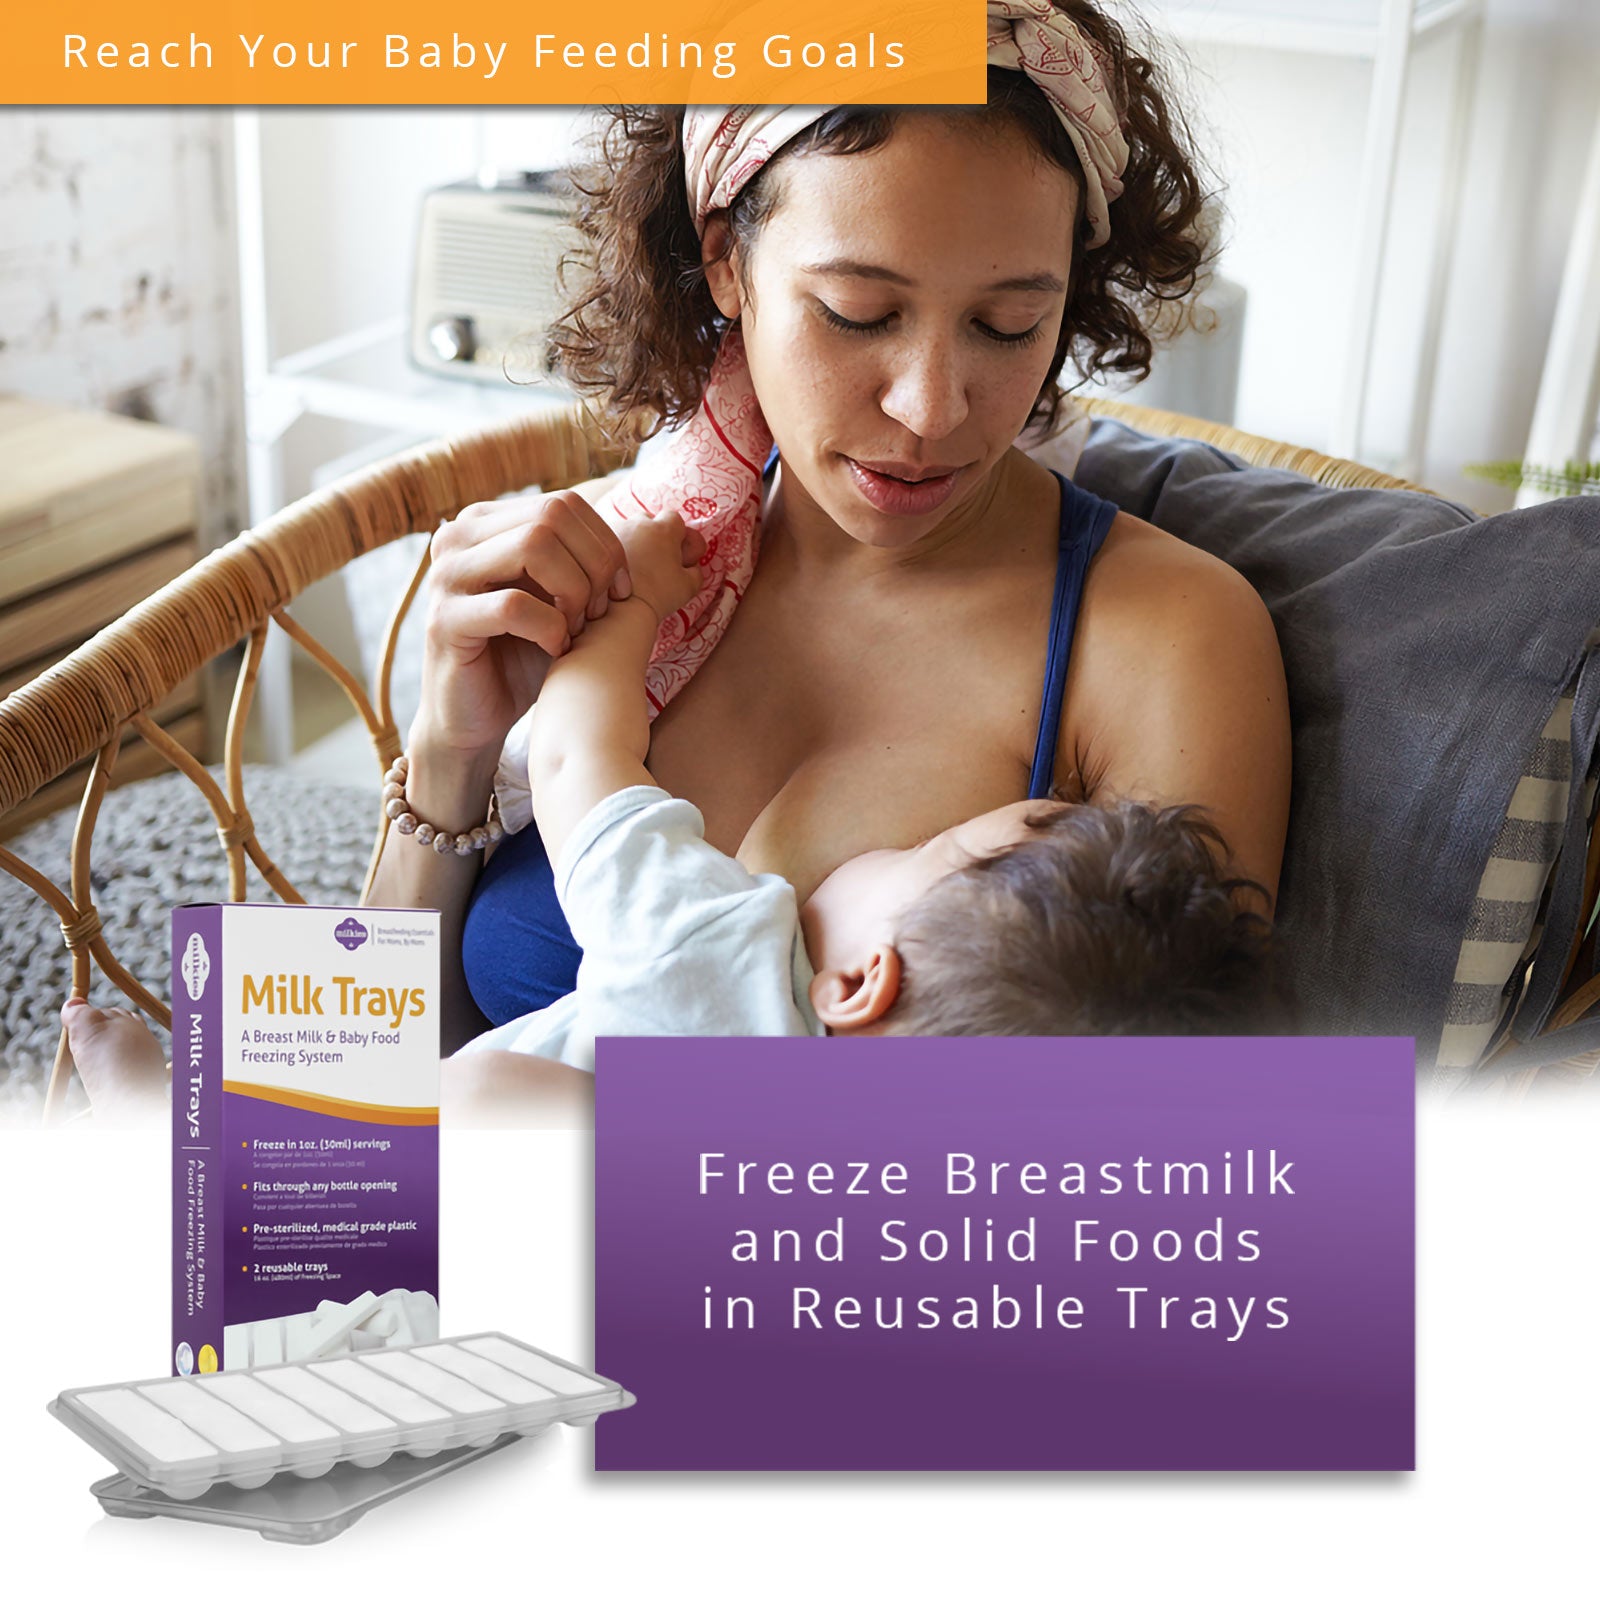 Freeze Breastmilk and Solid Foods in Reusable Trays